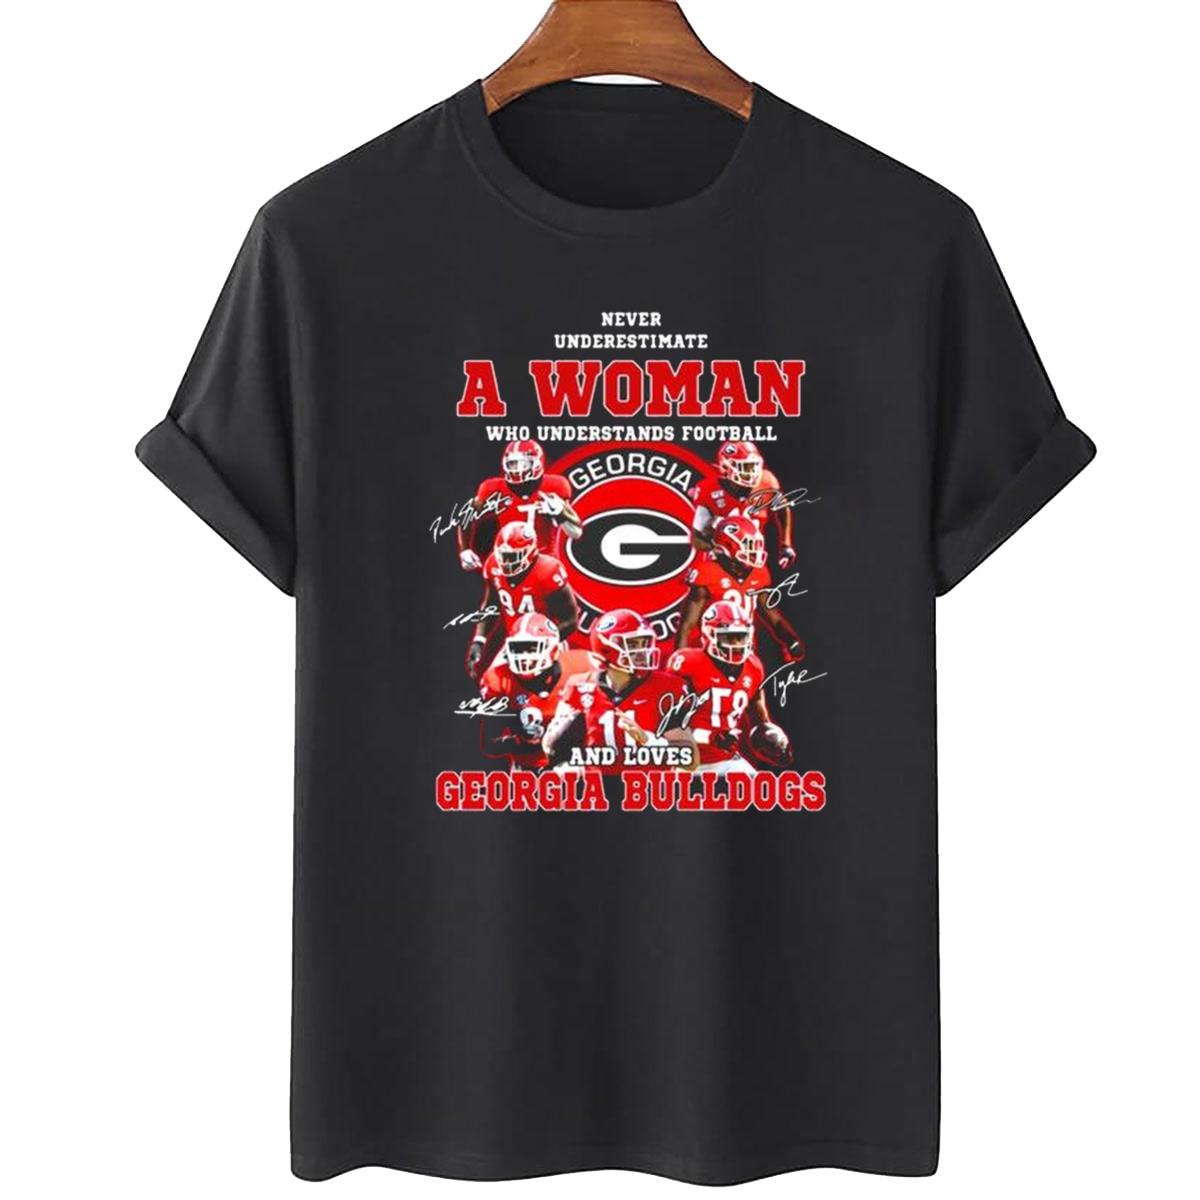 Never Underestimate Woman Understands Football And Loves Georgia Bulldogs Unisex T-Shirt